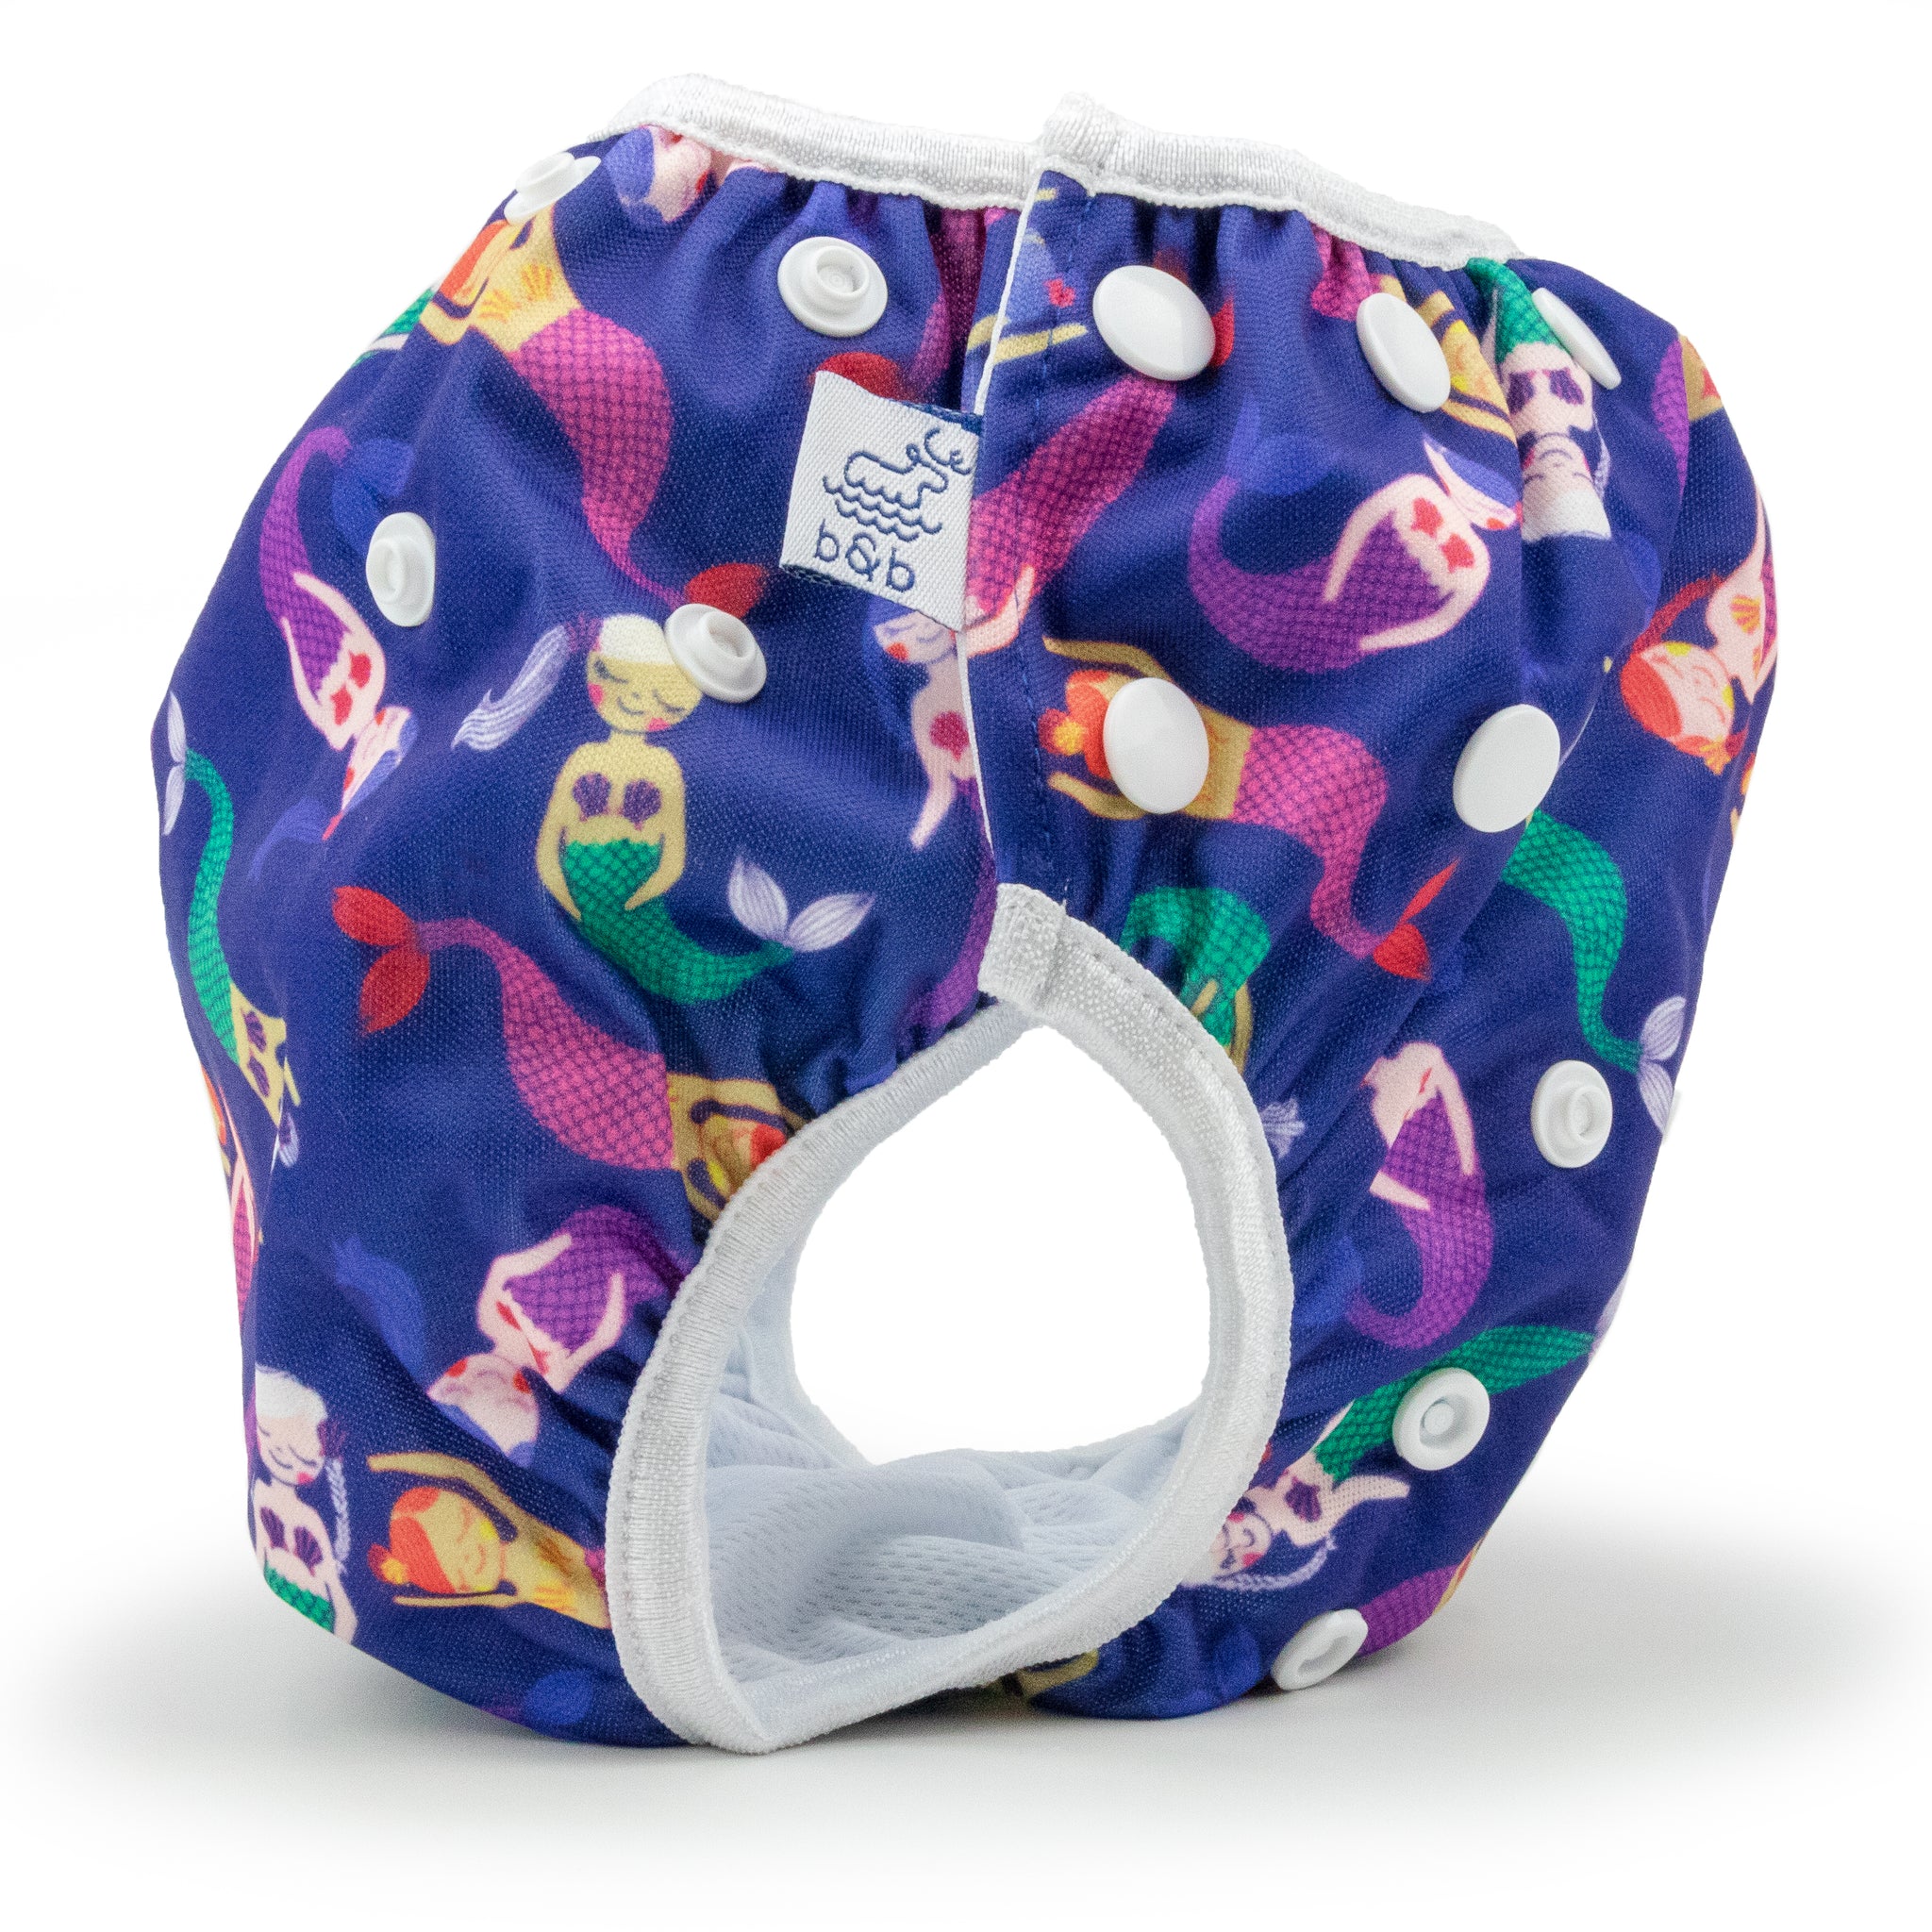 Beau and Belle Littles Swim Diaper, Large Size, dark purple with mermaids, side view